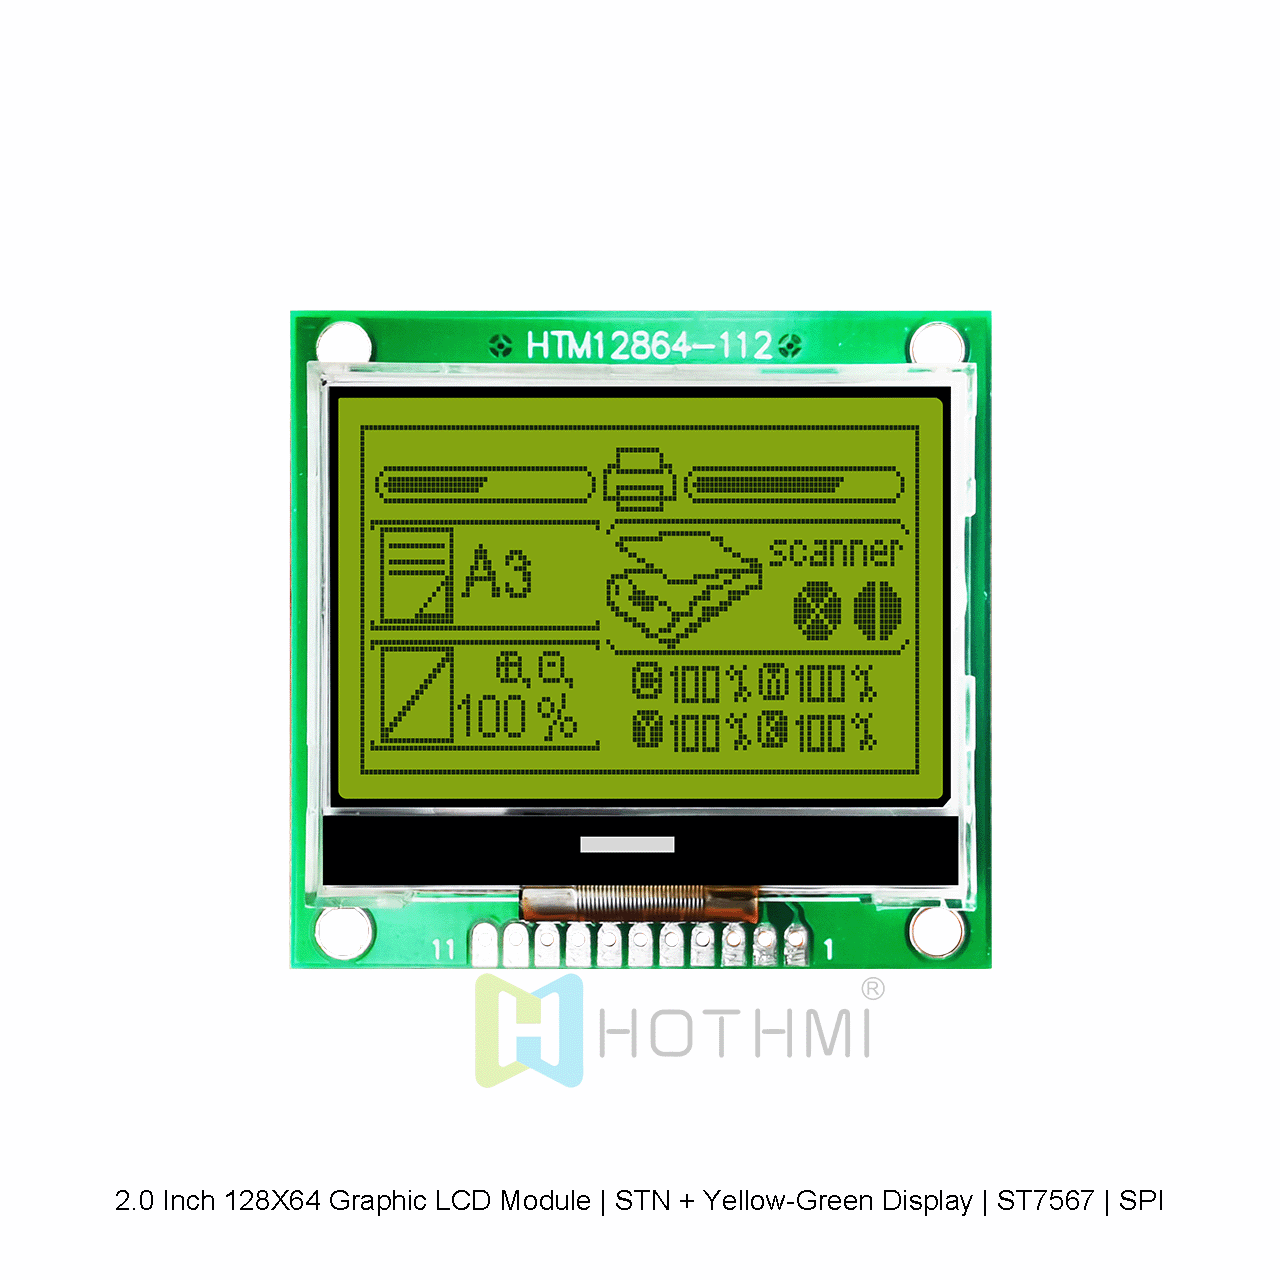 2.0 Inch 128X64 Graphic LCD Module | STN + Yellow-Green Display | ST7567 | SPI